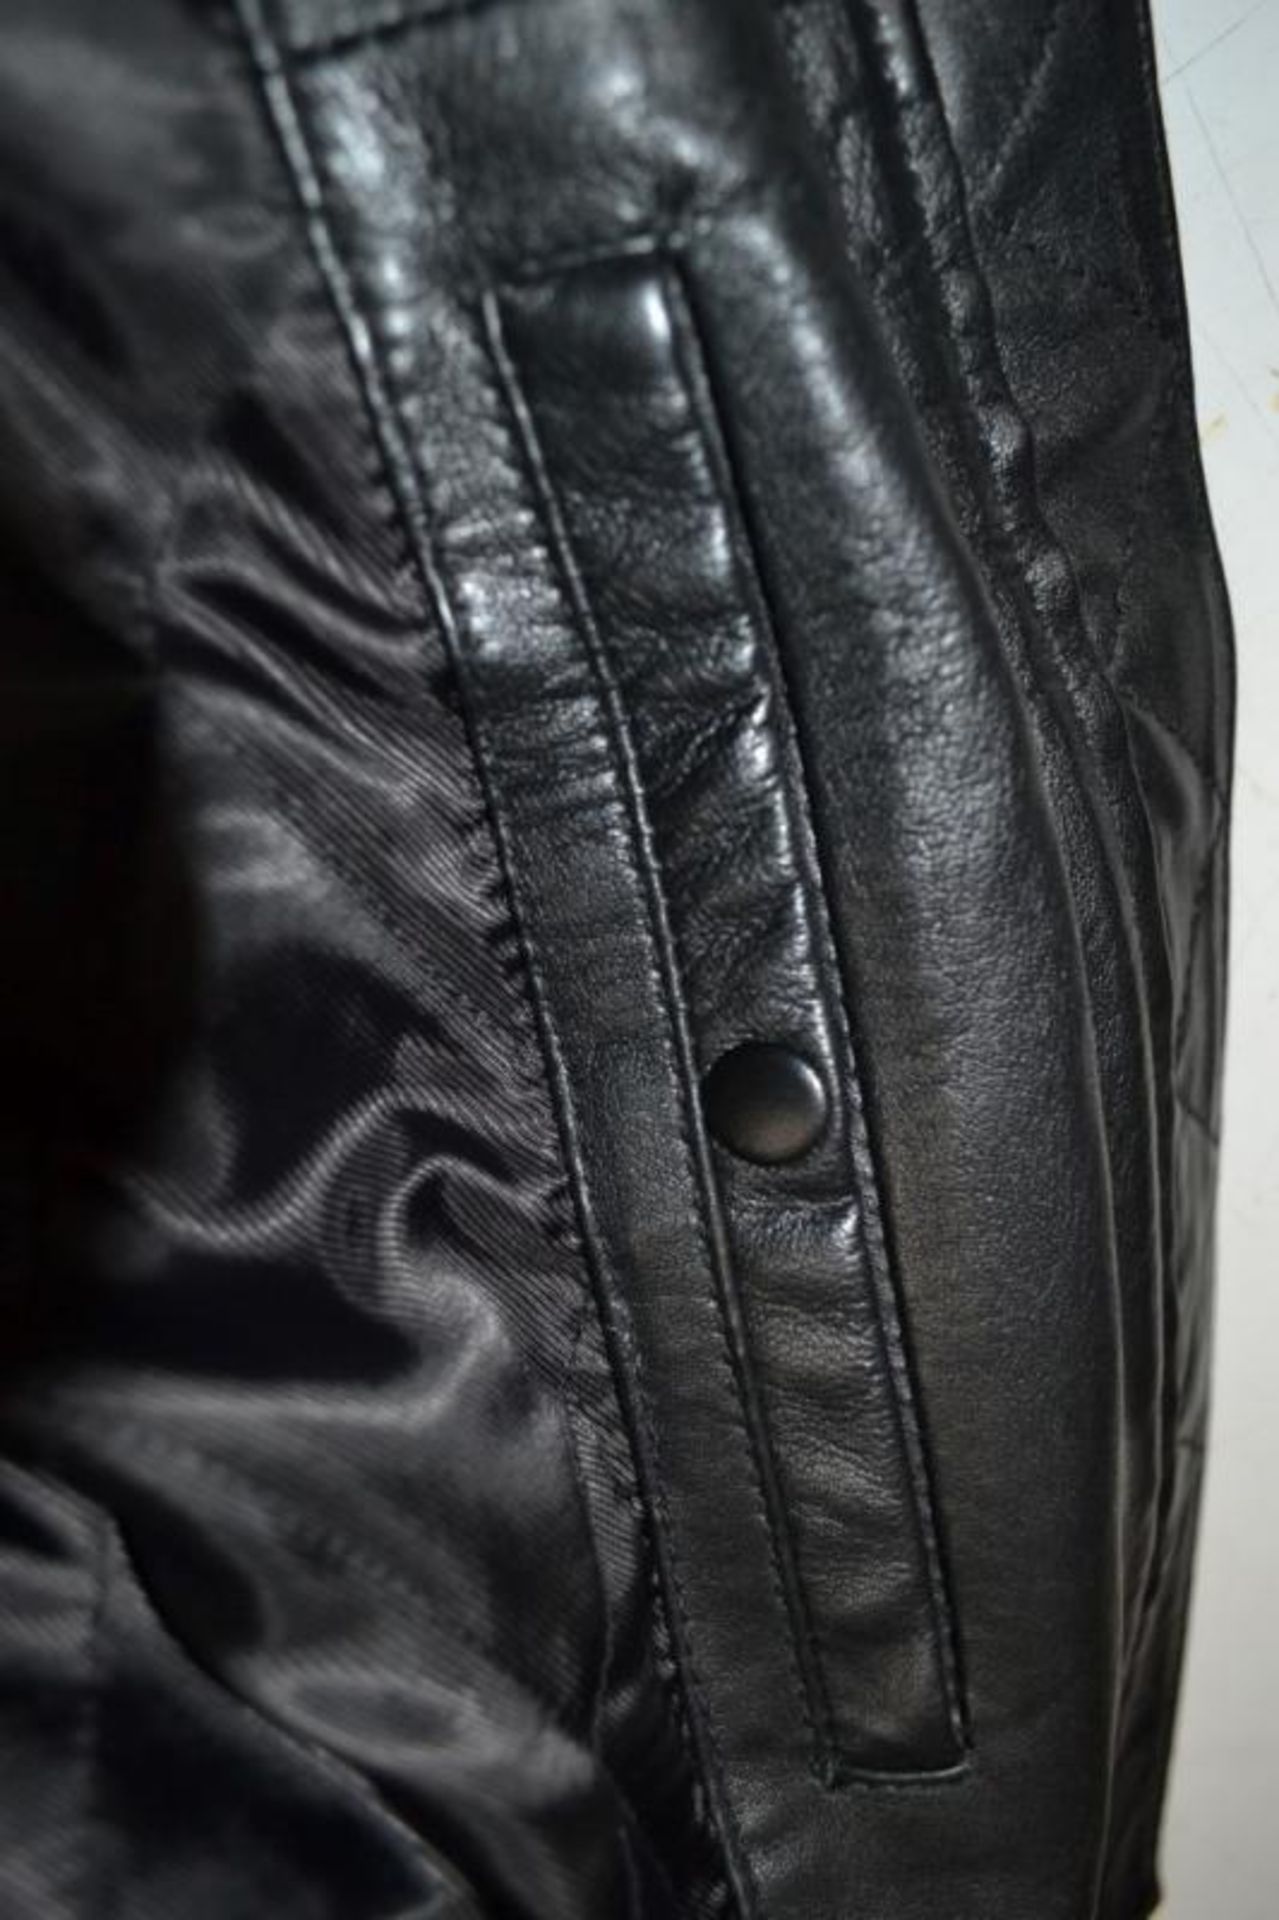 1 x GNIOUS "Black Label" Mens Lamb Nappa Leather Coat - Design: Victory - New Stock With Tags - - Image 3 of 3